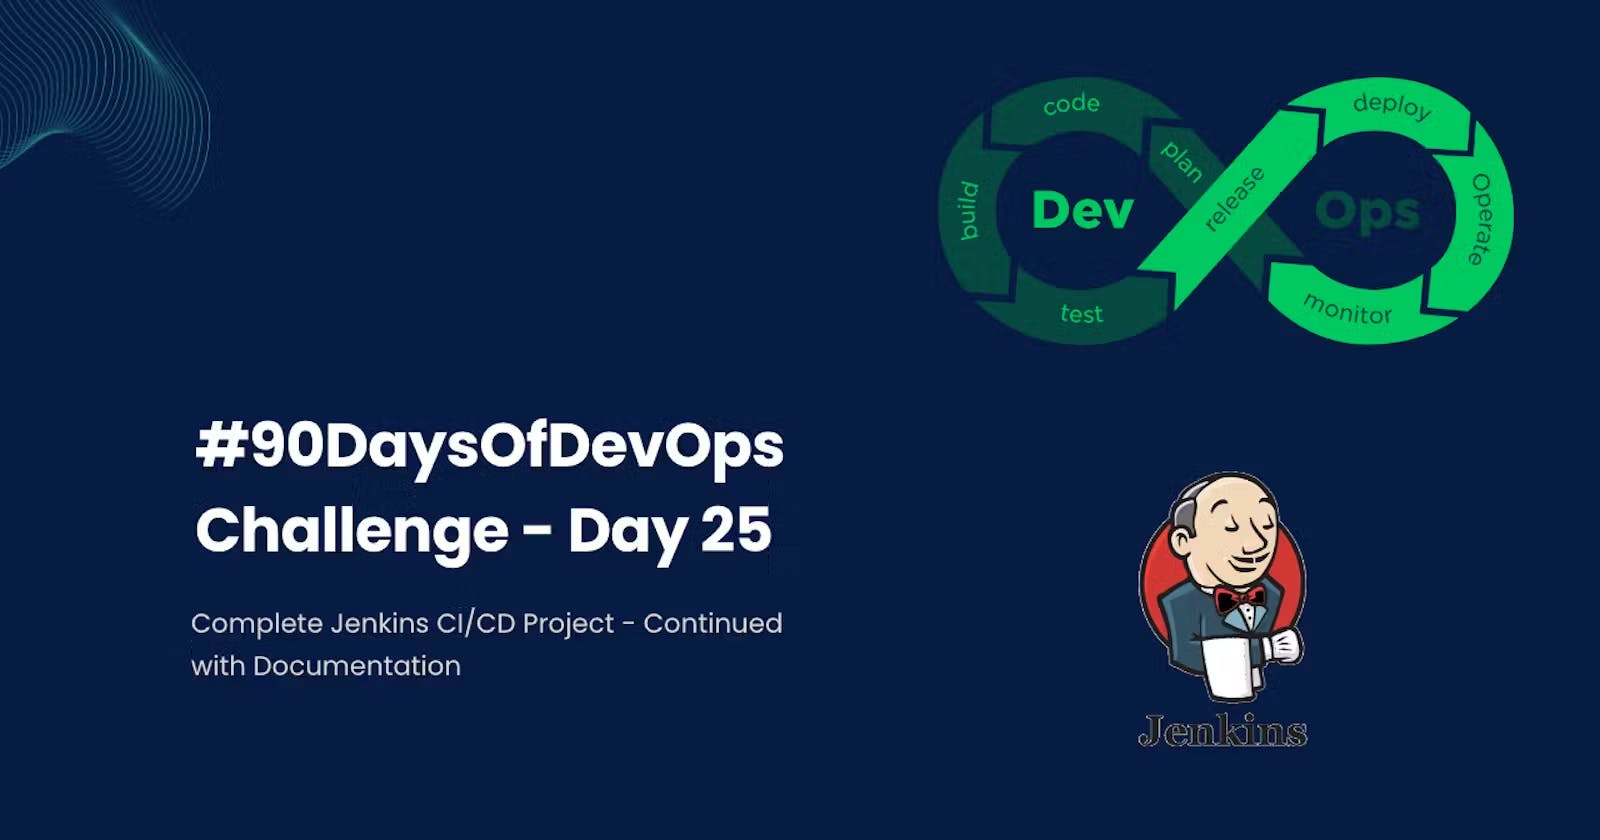 🛠Day 25 - Complete Jenkins CI/CD Project - Continued with Documentation